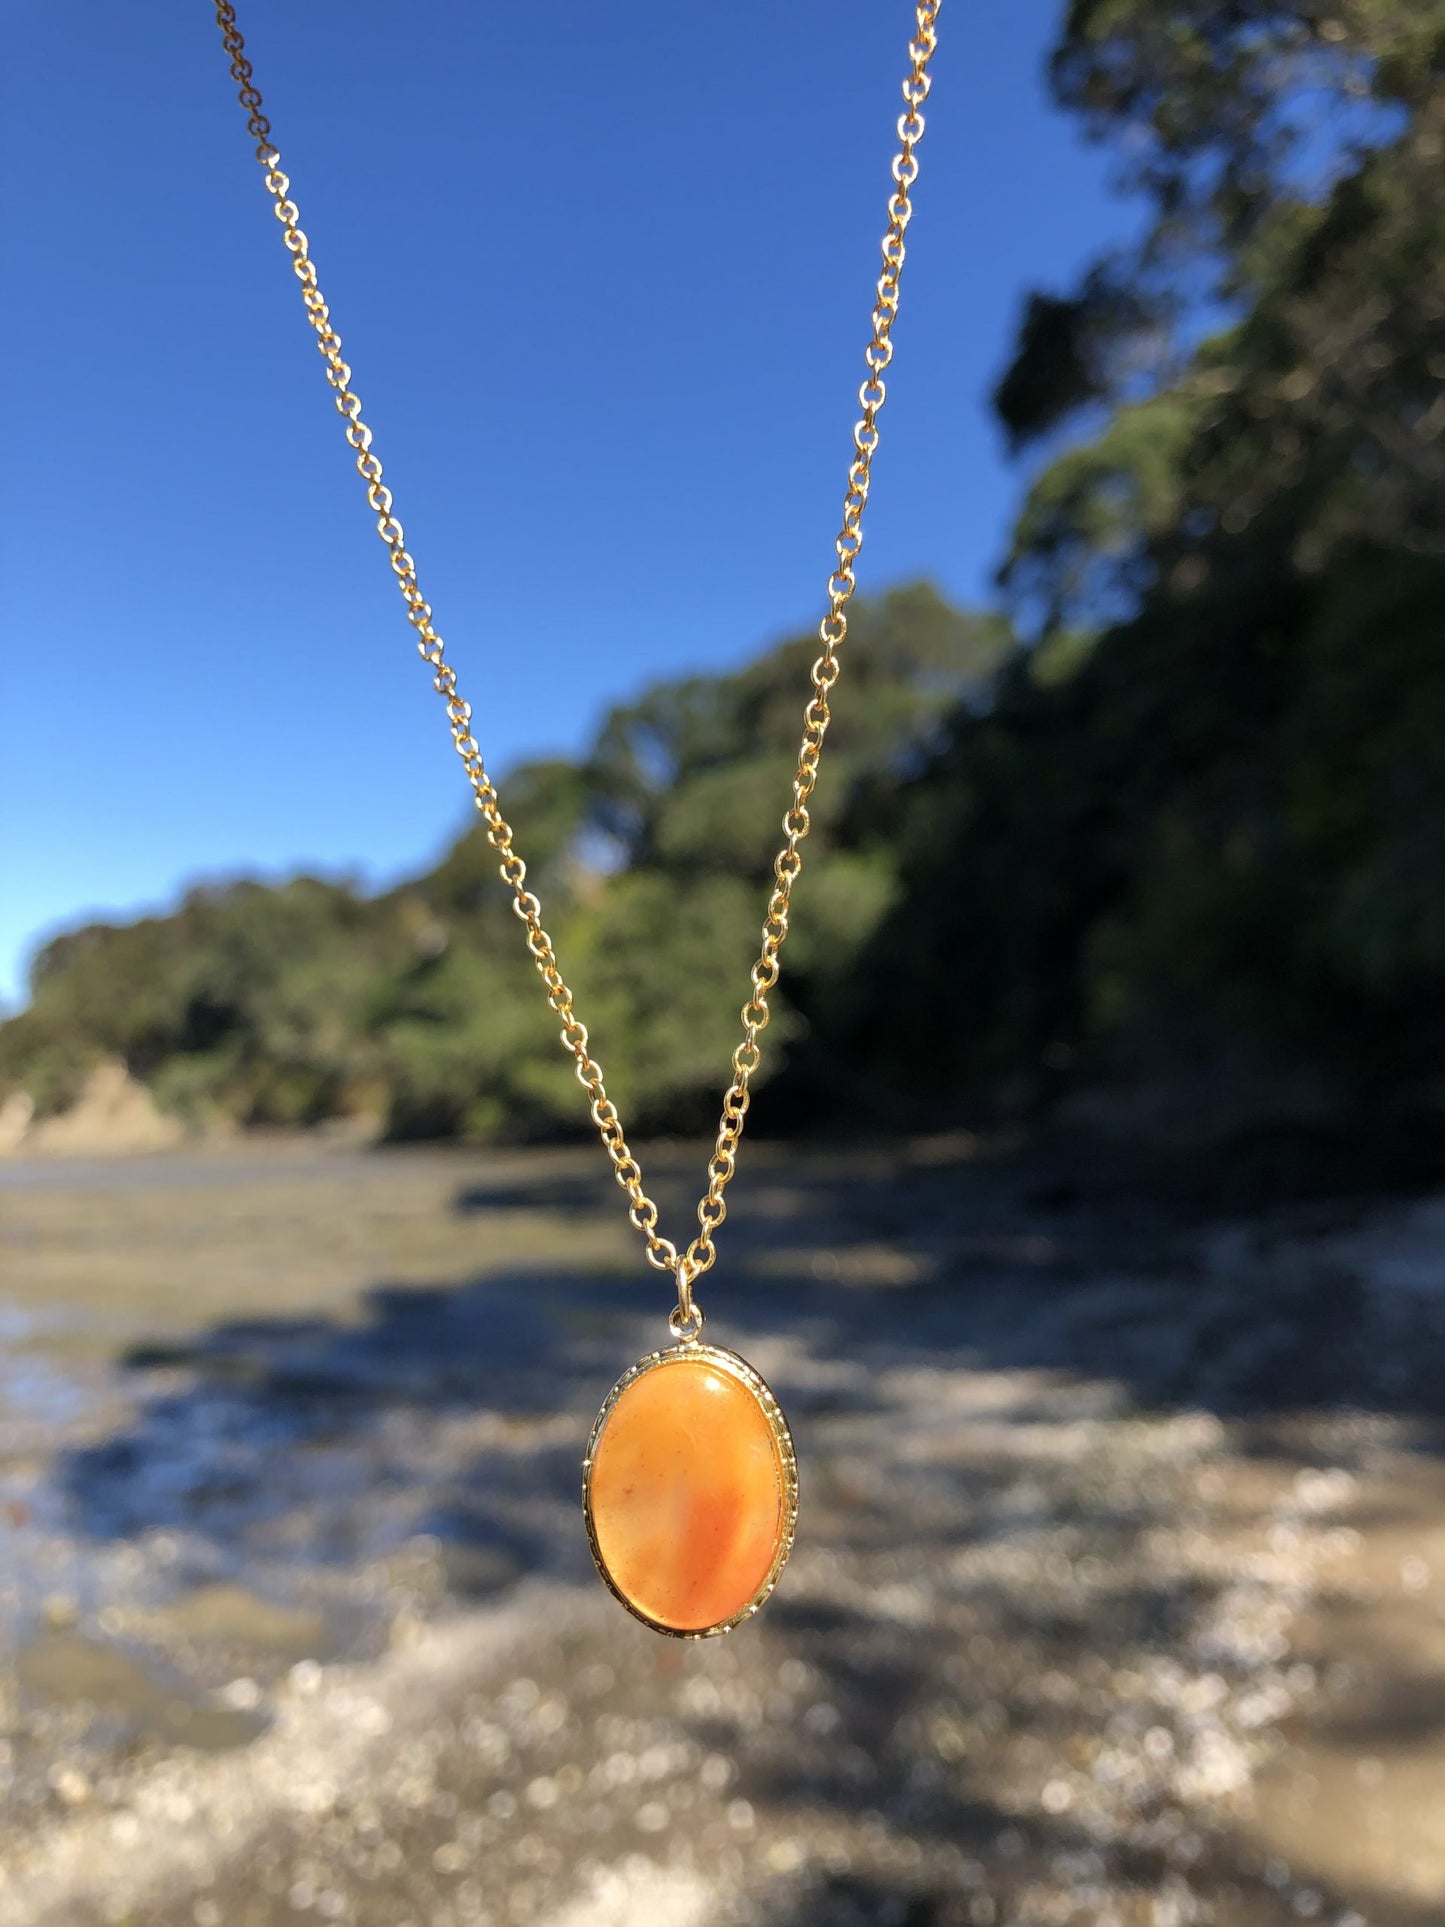 Necklace of Arizona USA "Rainbow" wood, bright orange, hand polished to an 18x13mm cabochon and set in gold plated setting with 19 inch chain.